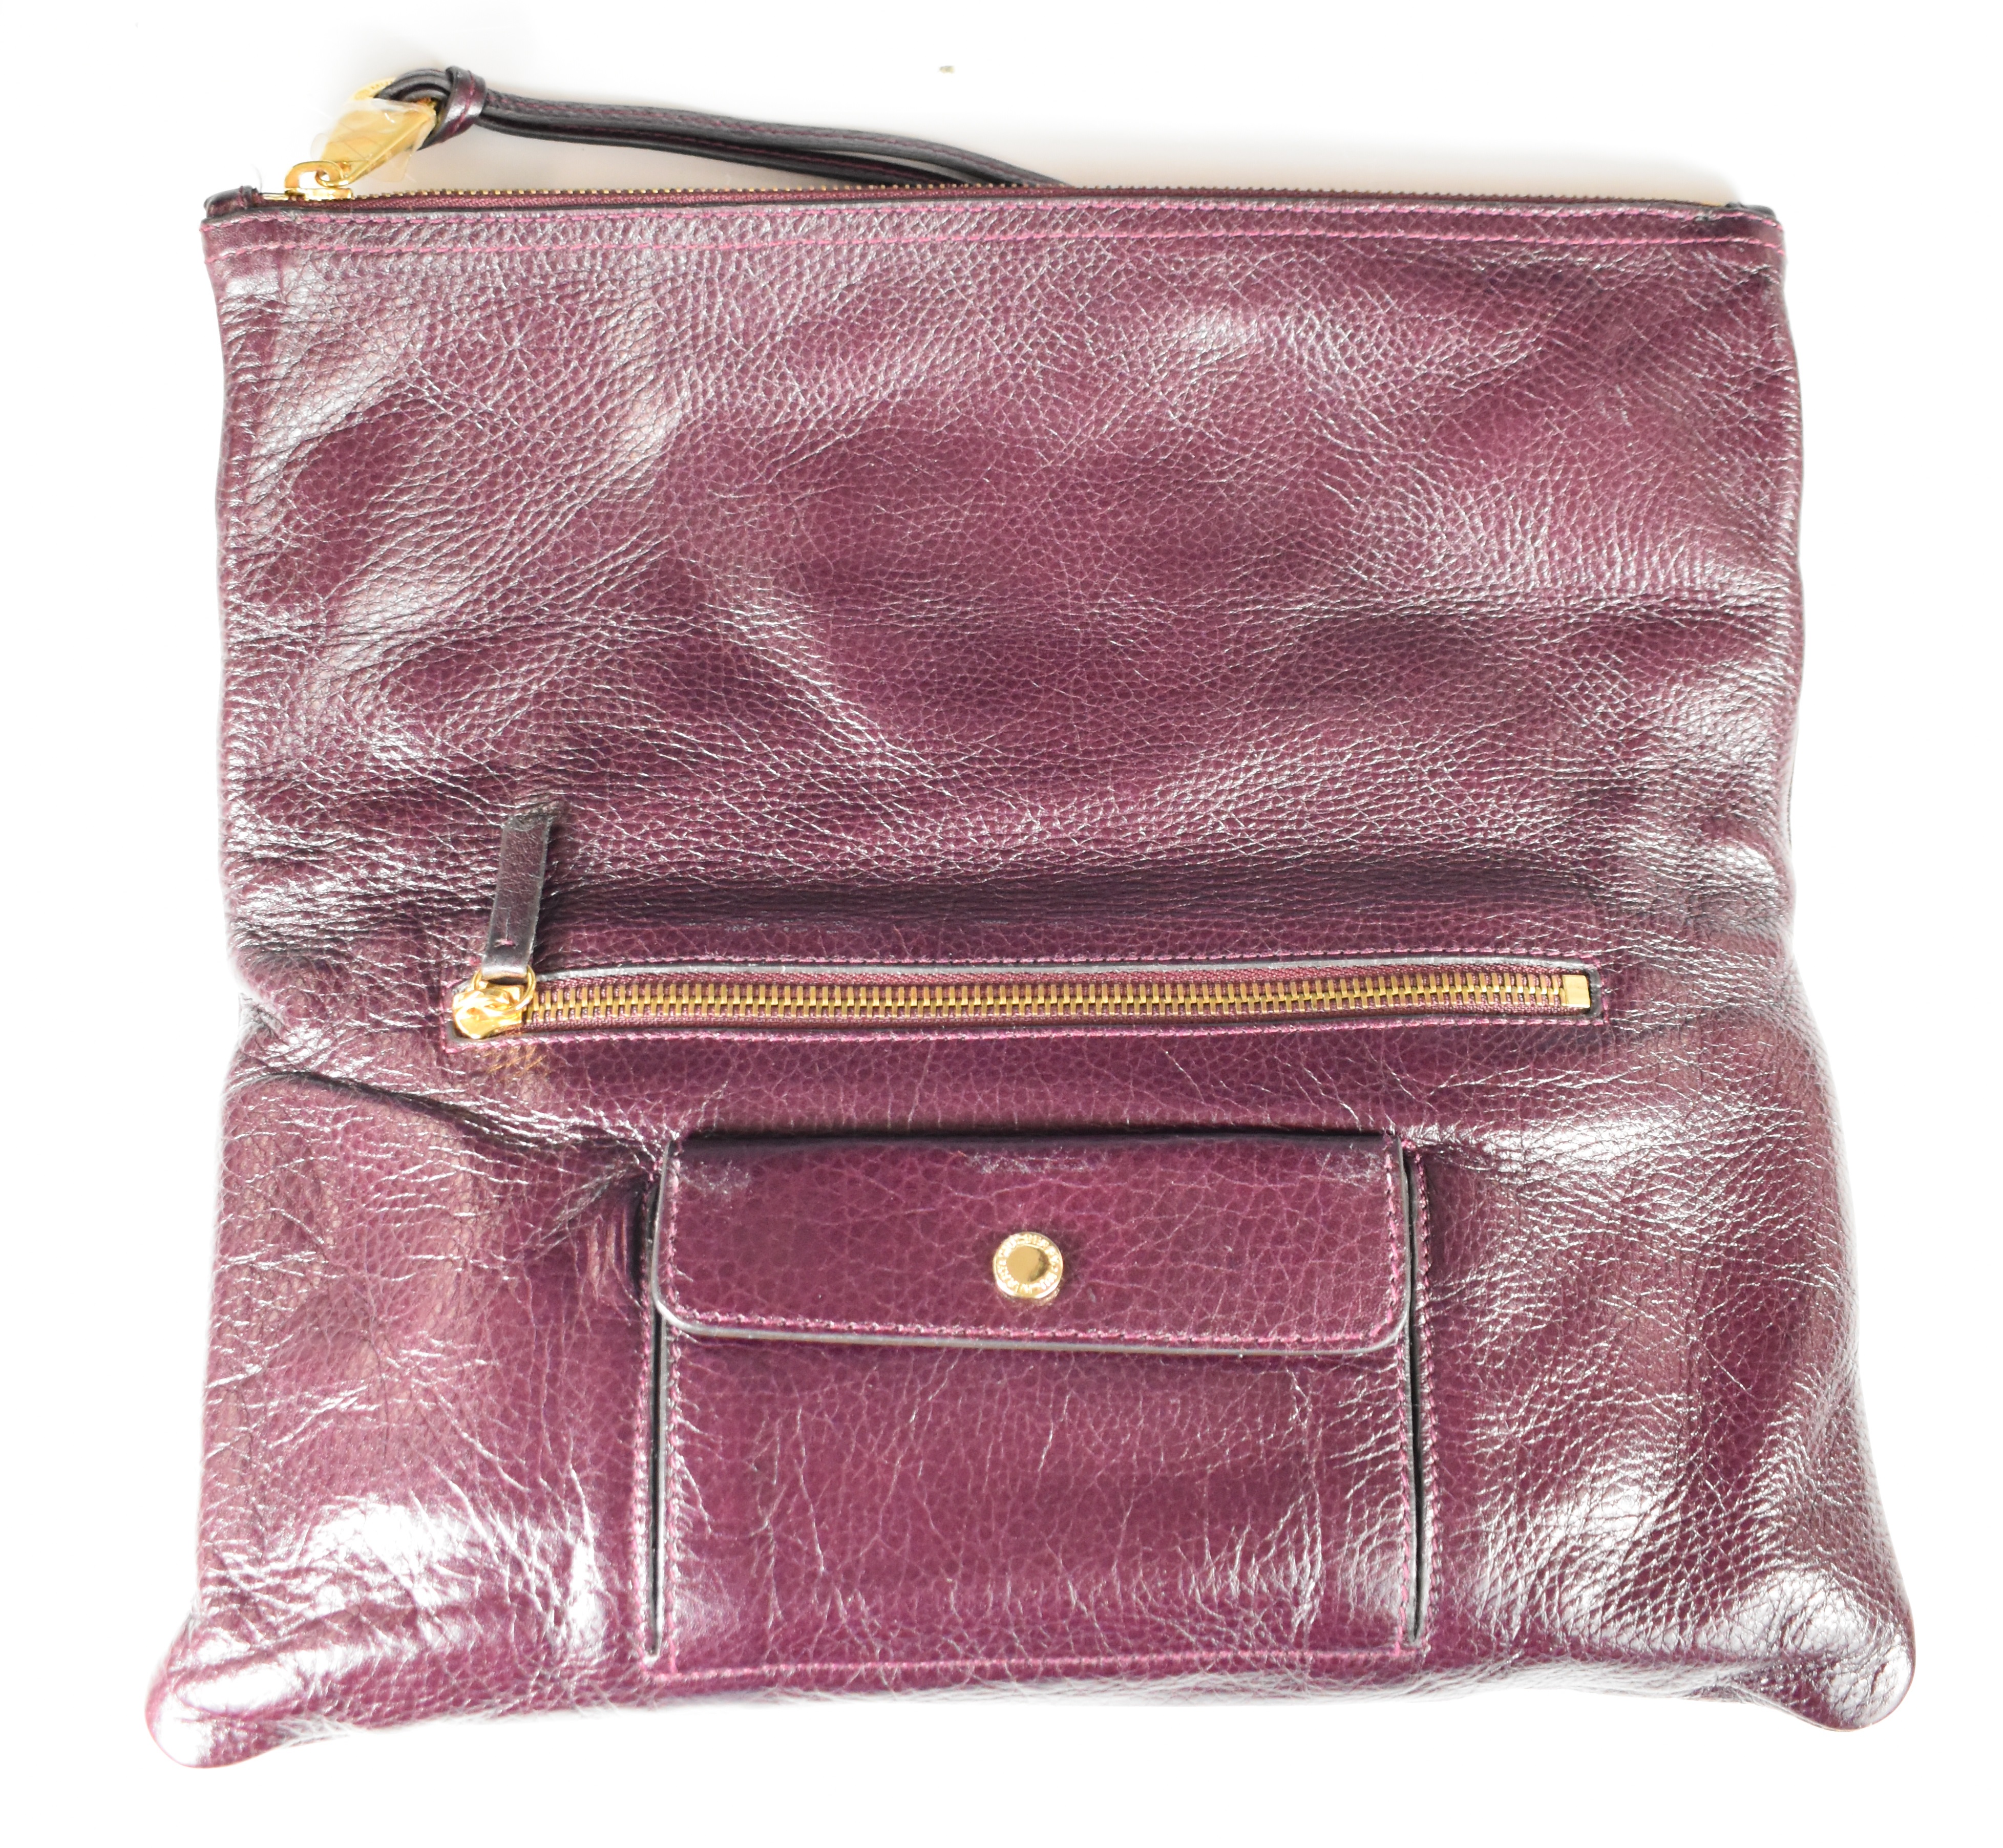 Mulberry Daria clutch bag in oxblood grained leather with gilt metal hardware, original label, - Image 6 of 9